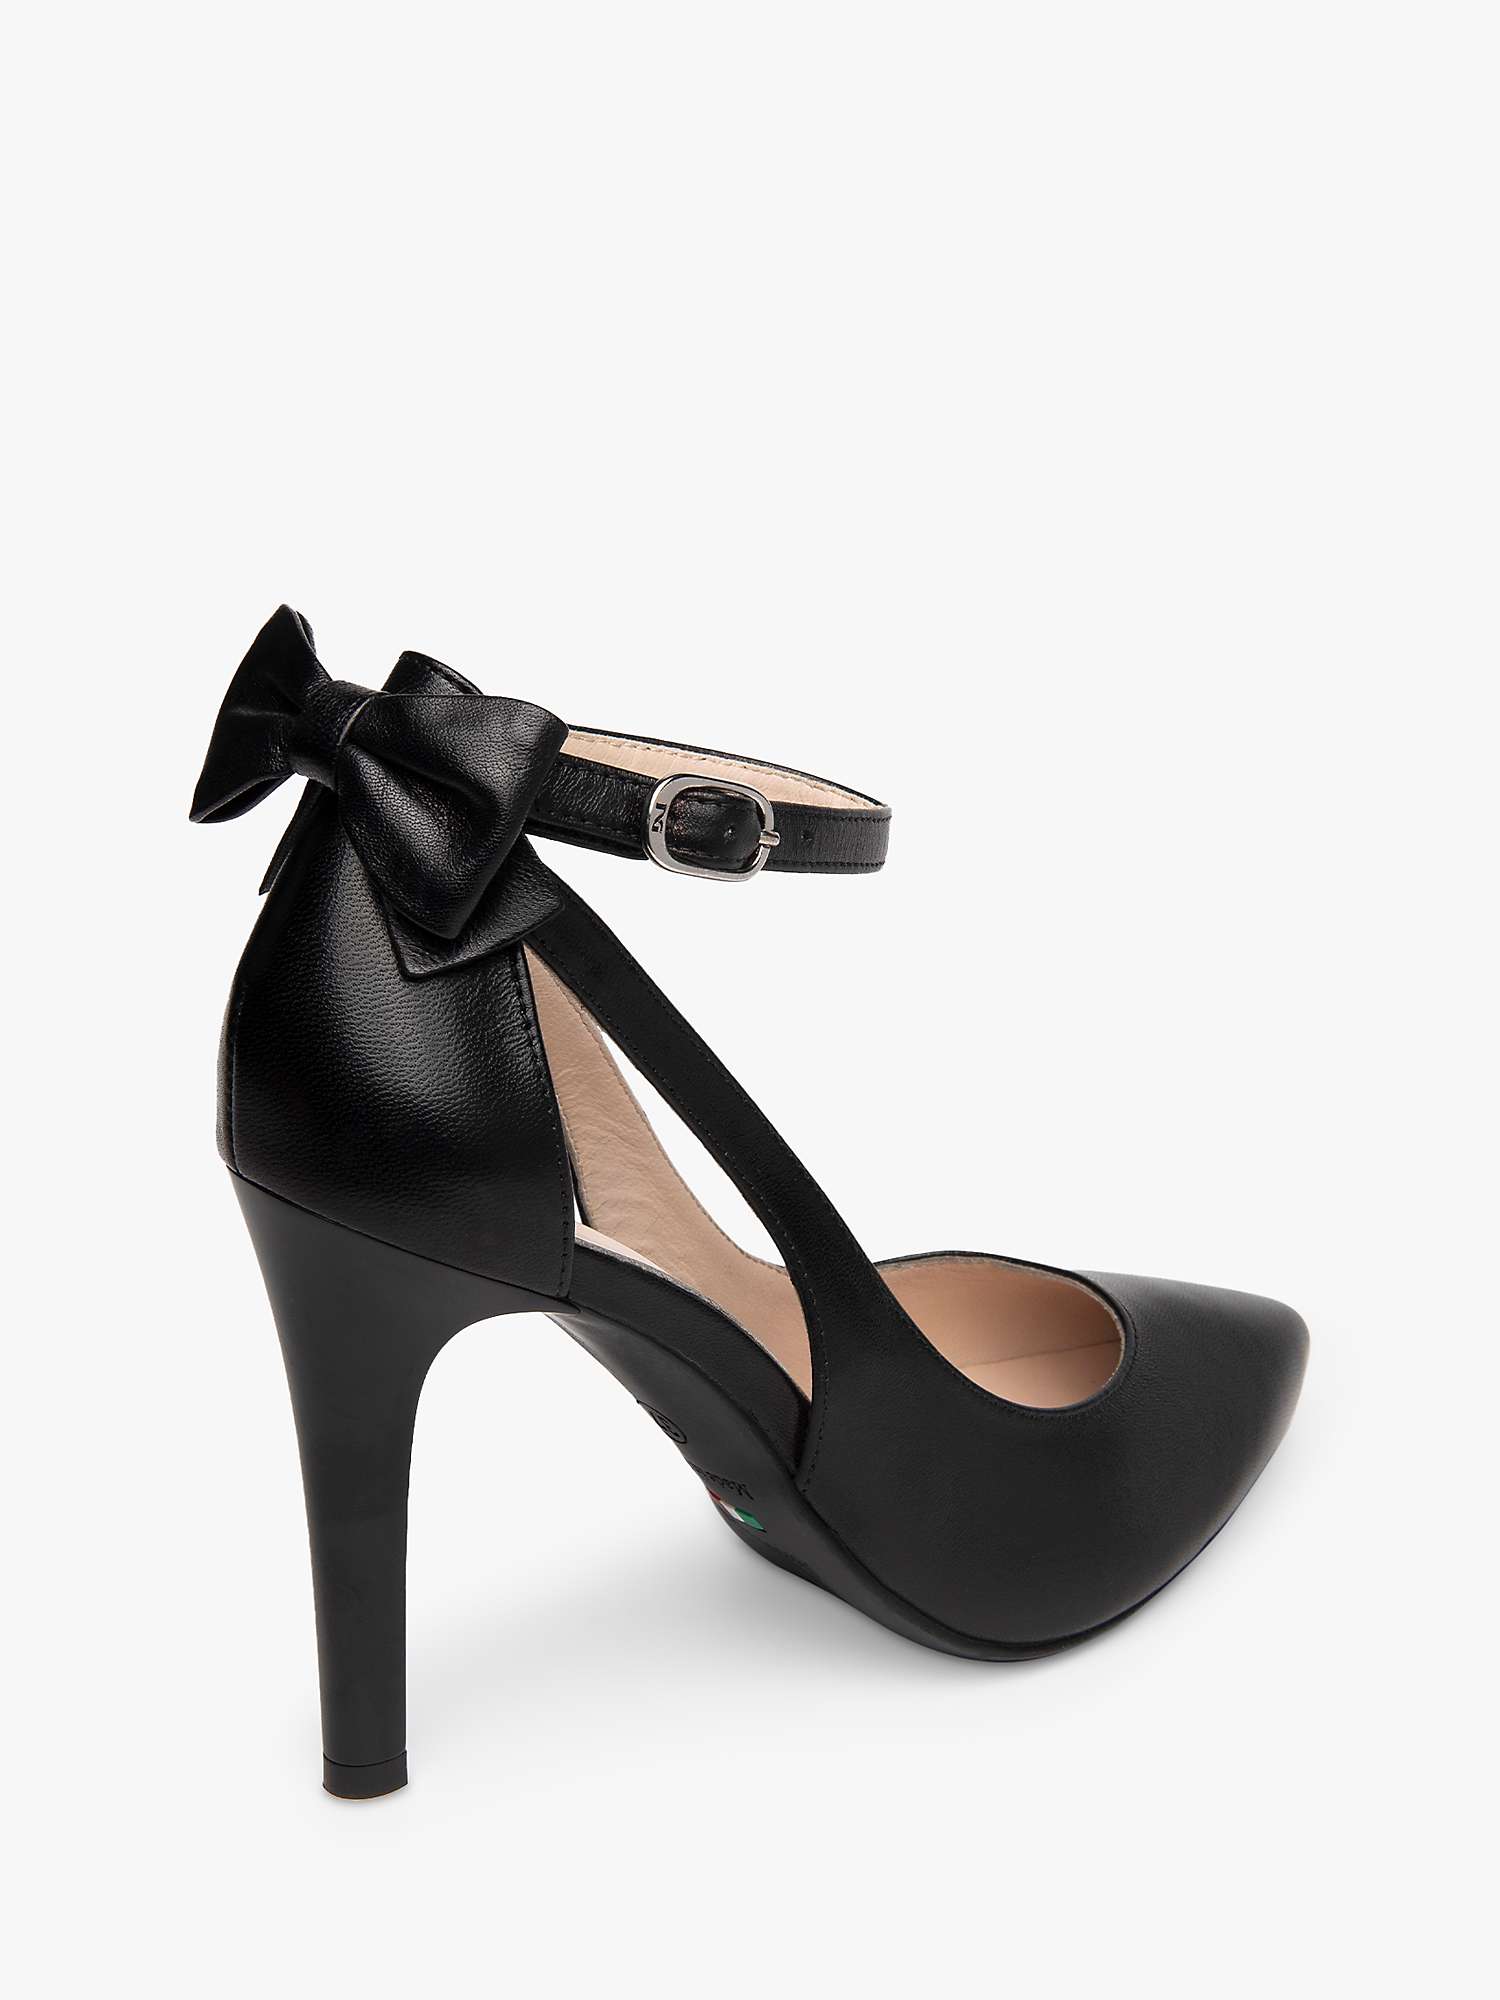 Buy NeroGiardini Leather Bow Court Shoes, Black Online at johnlewis.com